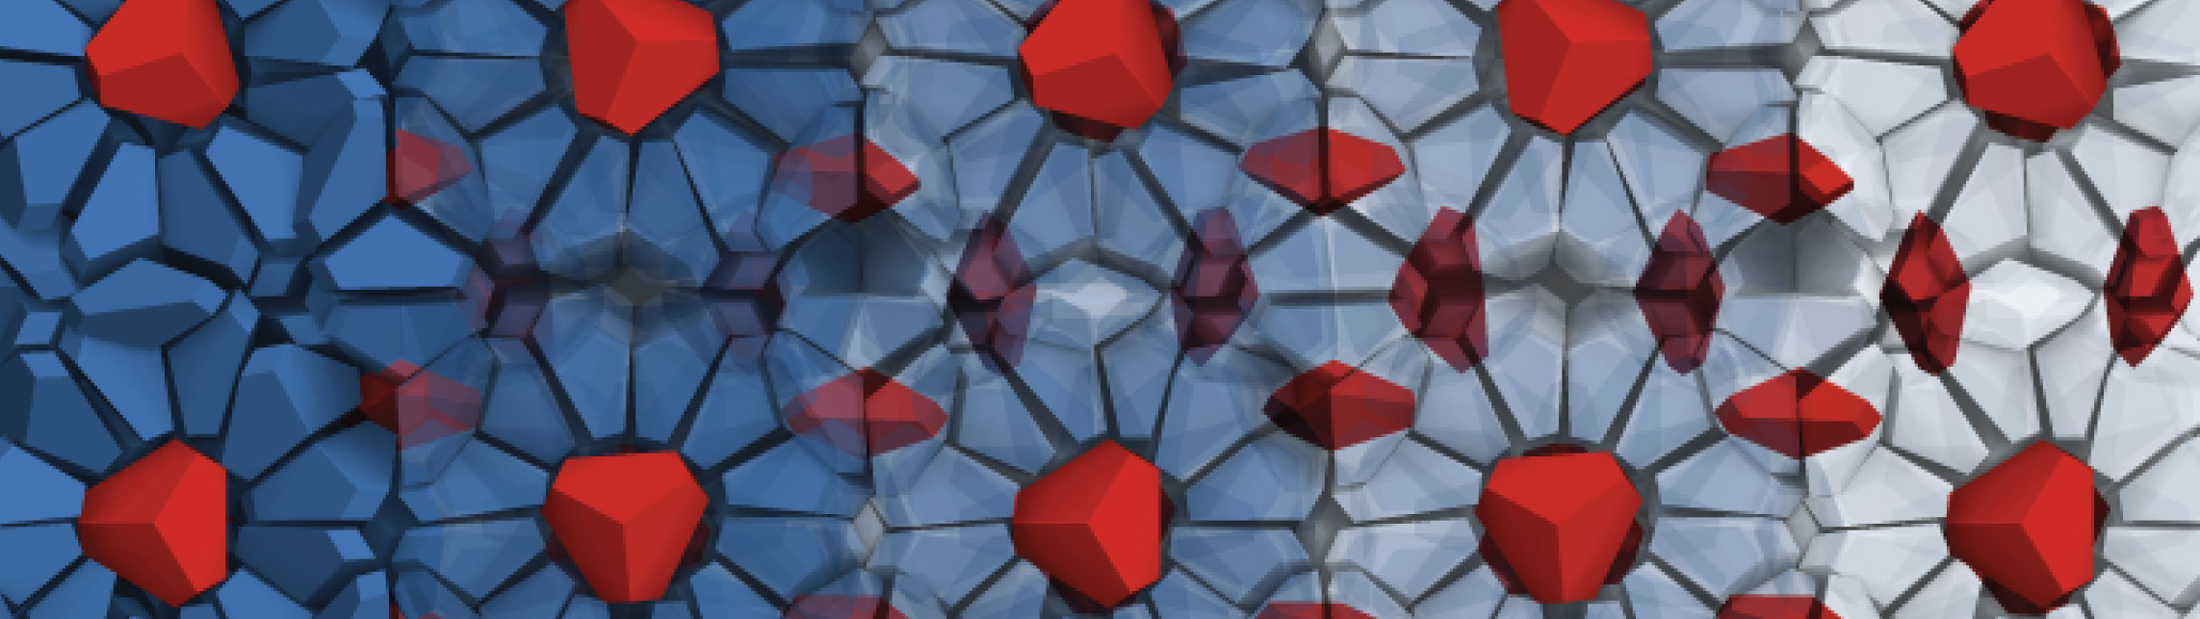 The cages of the host network of bipyramid particles are shown in blue on the left side, becoming increasingly transparent toward the right. The red bipyramid particles are guest particles, trapped in the cages of the clathrate structure